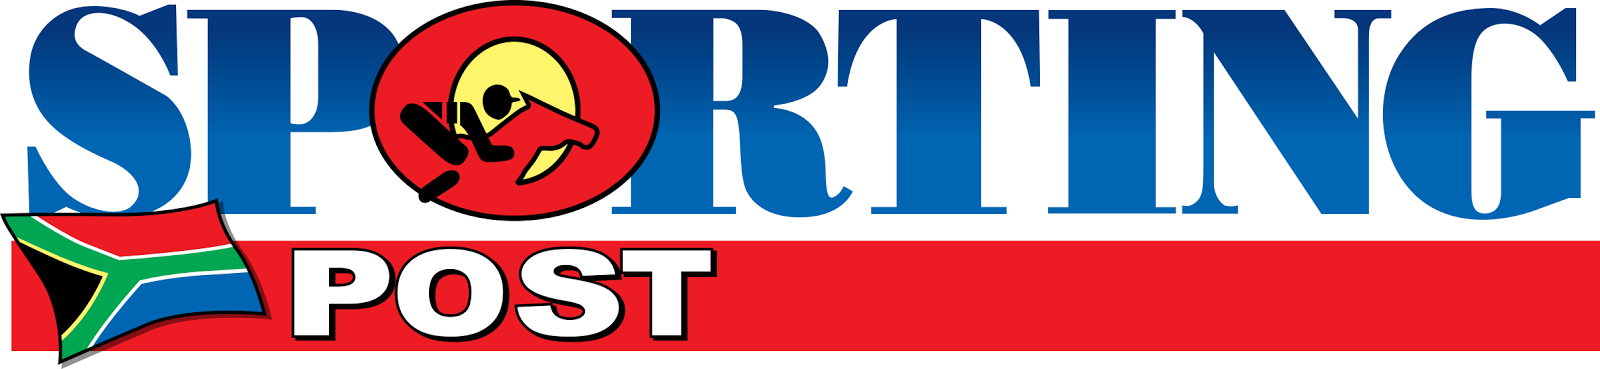 Sporting Post - Horse Racing Newspaper - Logo - South Africa - Publication